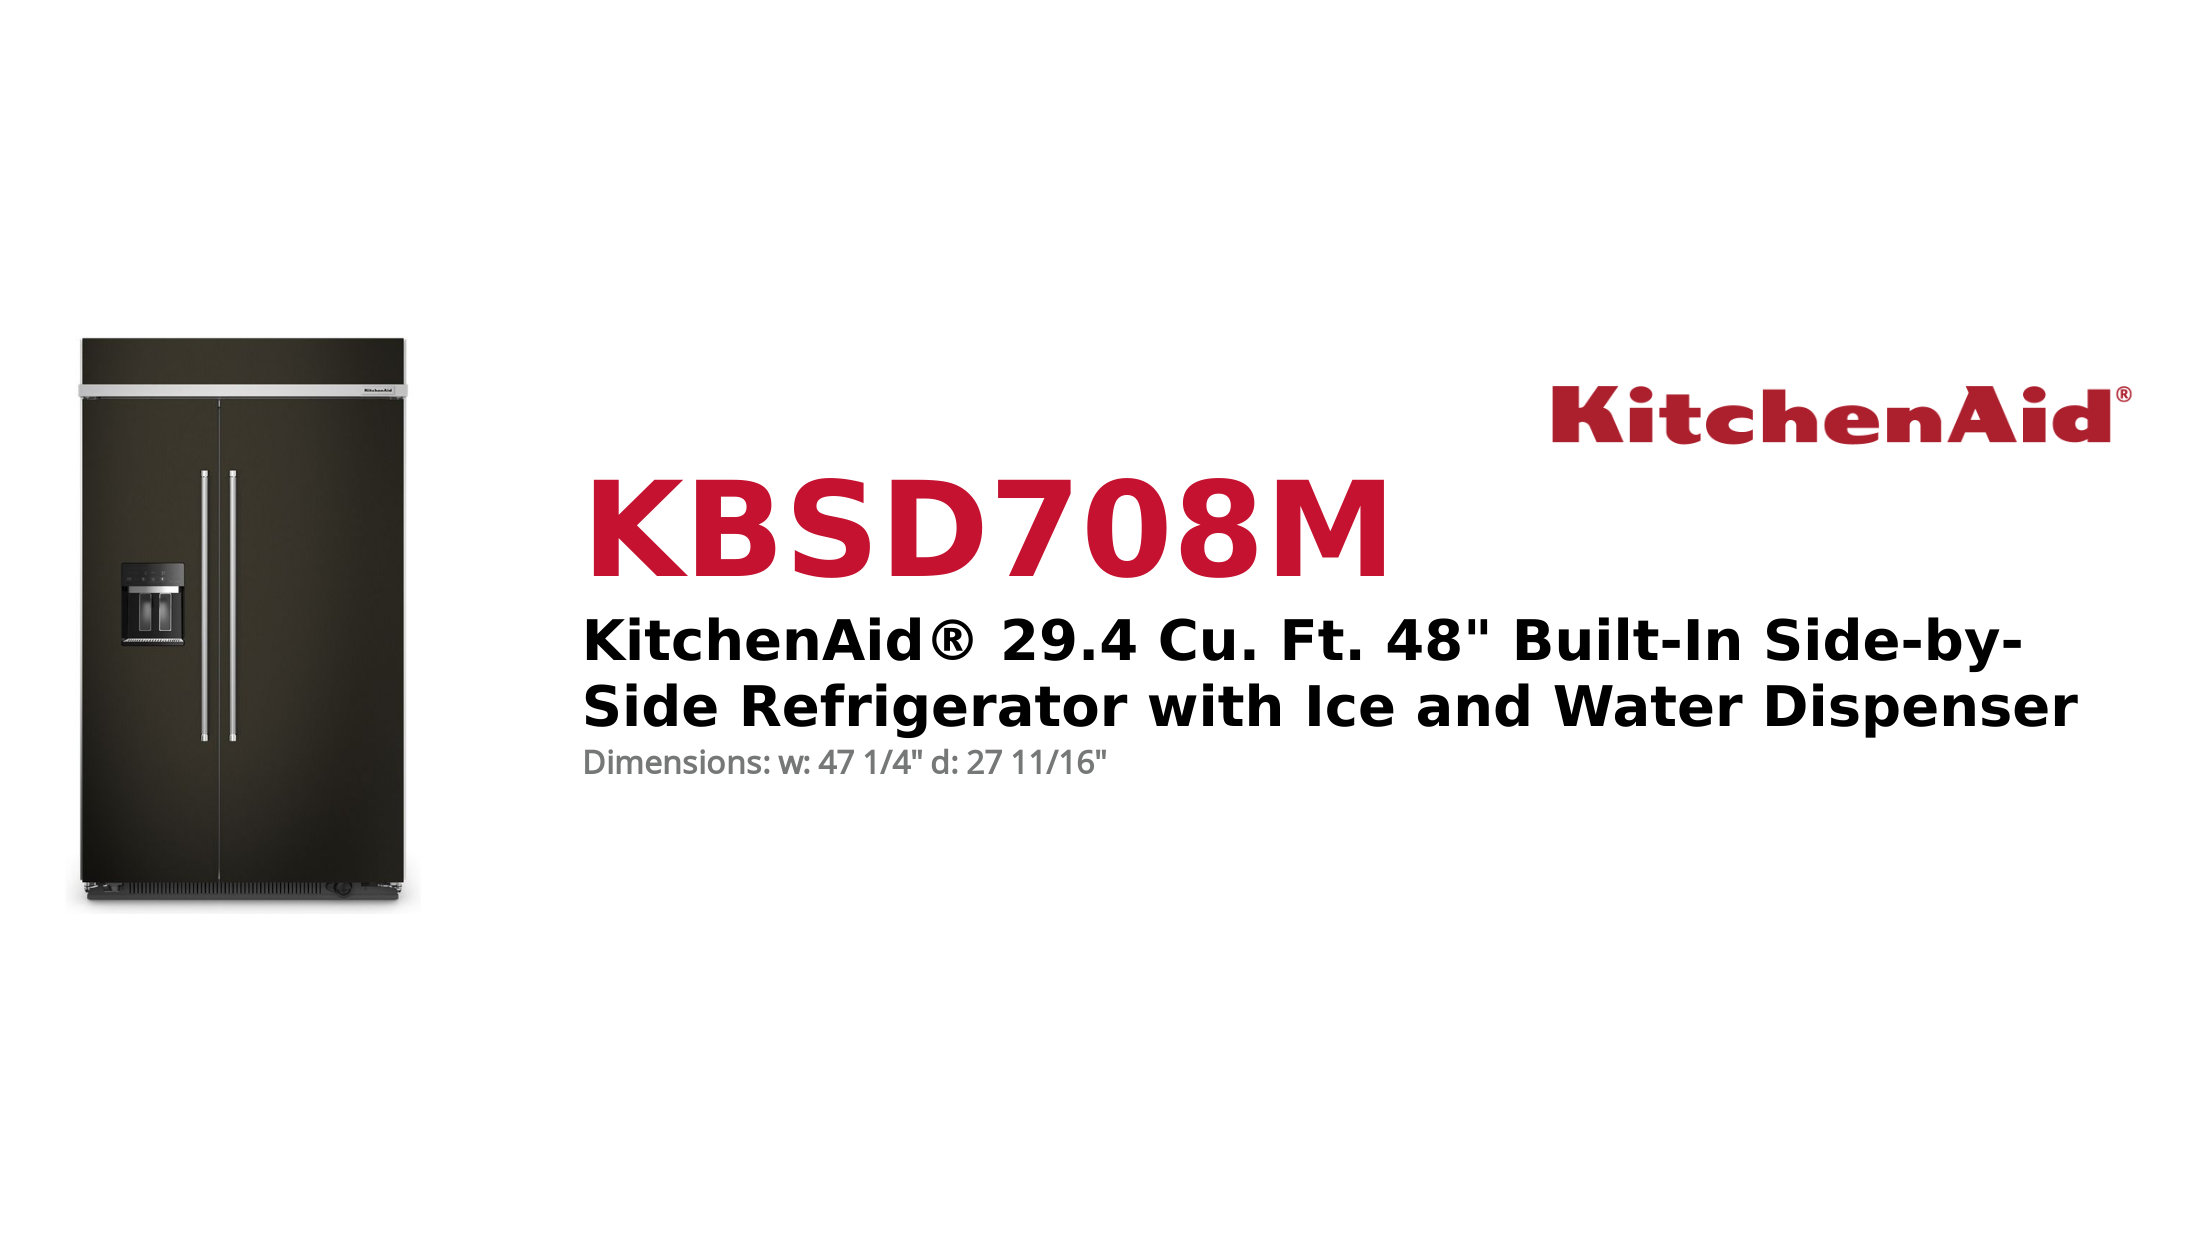 KitchenAid® 29.4 Cu. Ft. 48 Built-In Side-by-Side Refrigerator with Ice and Water Dispenser